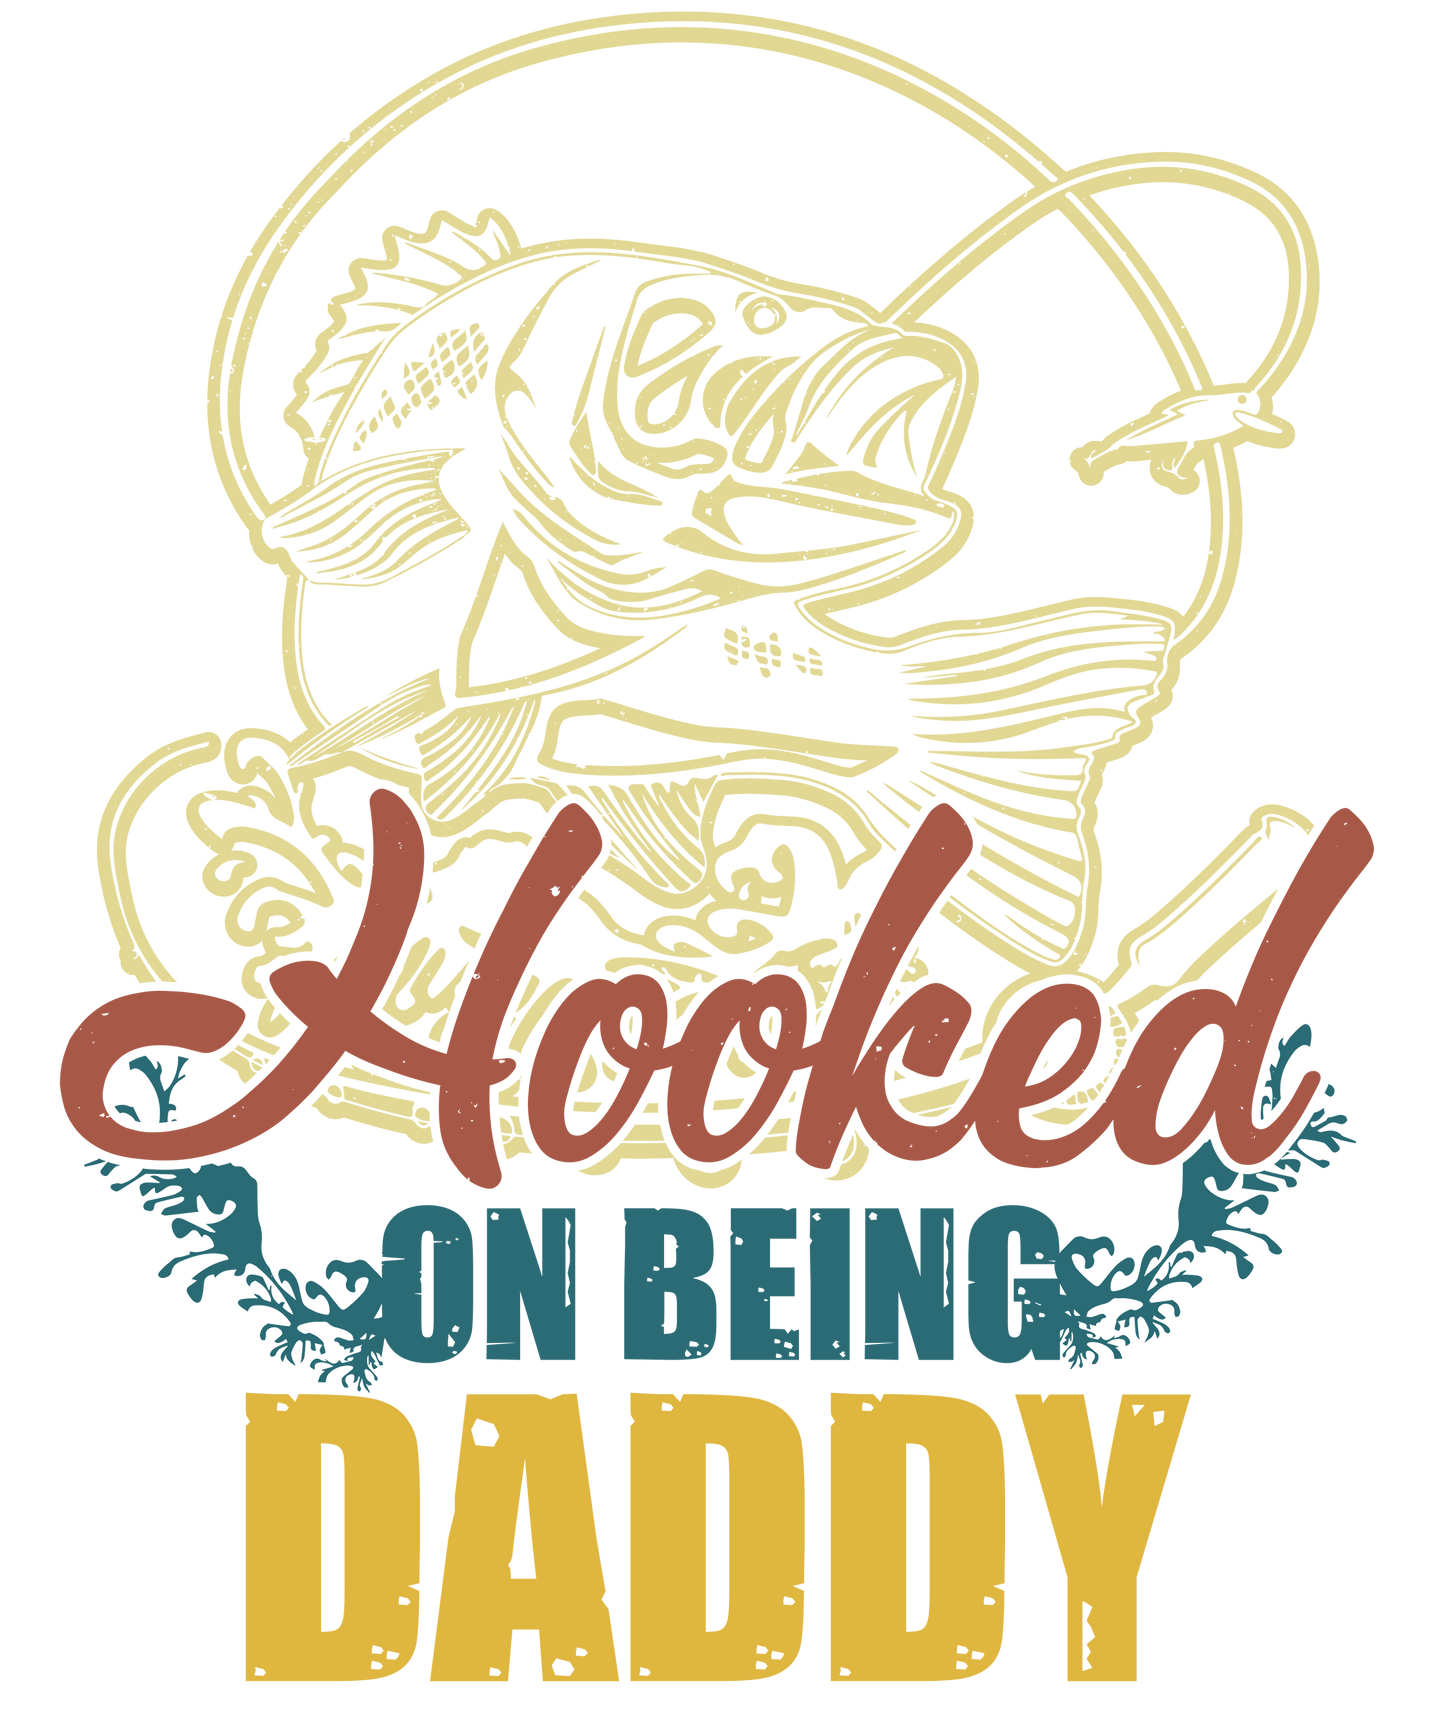 Hooked On Being Daddy Design Transfer